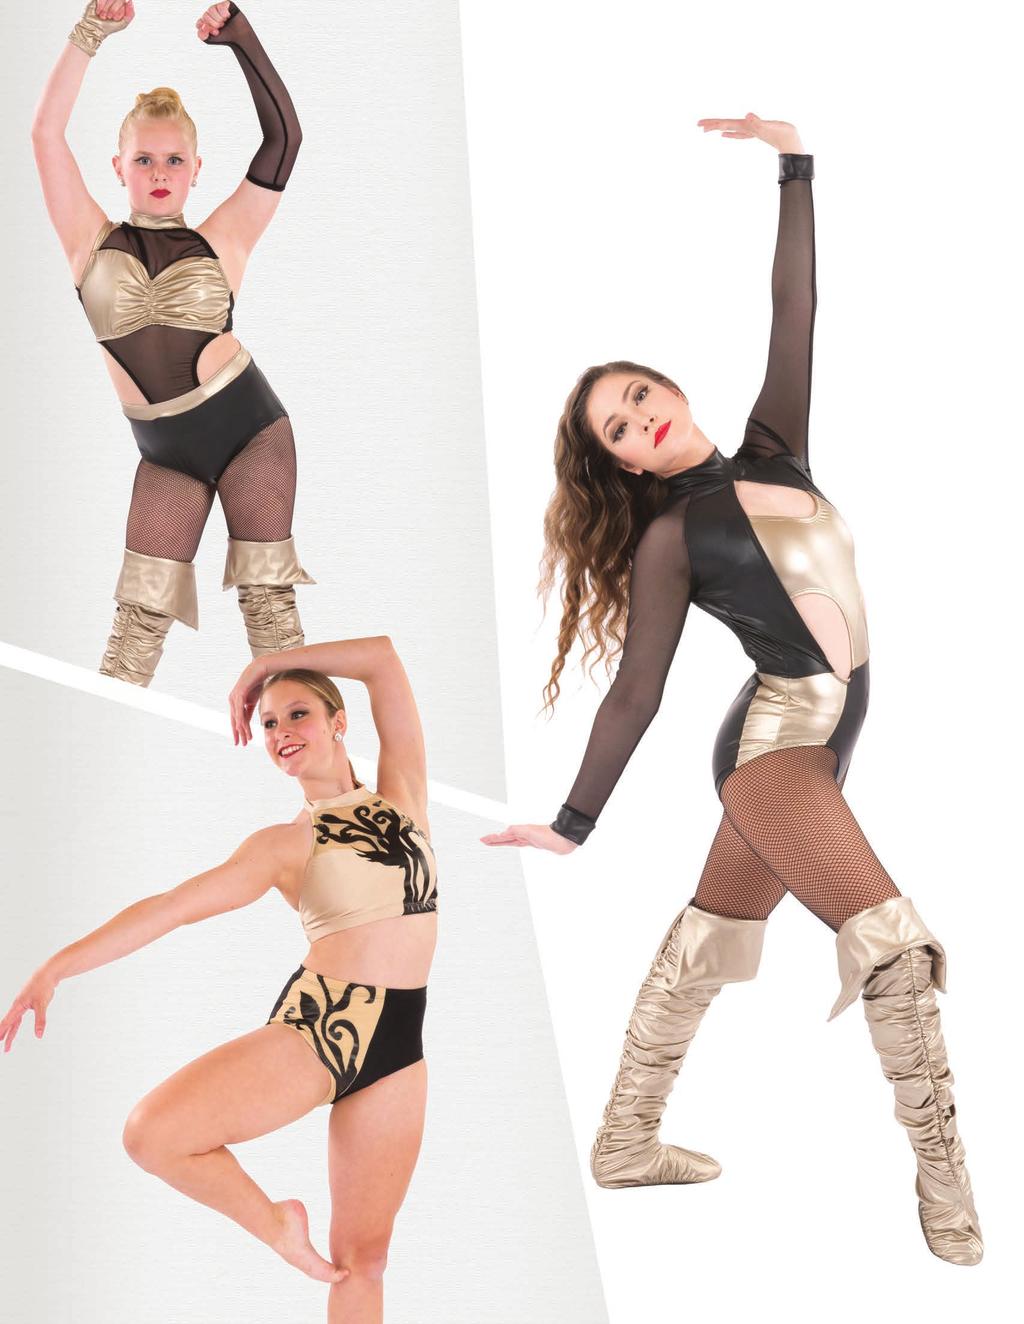 FIERCE LAMÉ Colors: Gold, Silver 81549 LEOTARD, MITTS & BOOT COVERS (OPT) Black stays same 81550 LEOTARD, BOOT COVERS (OPT)